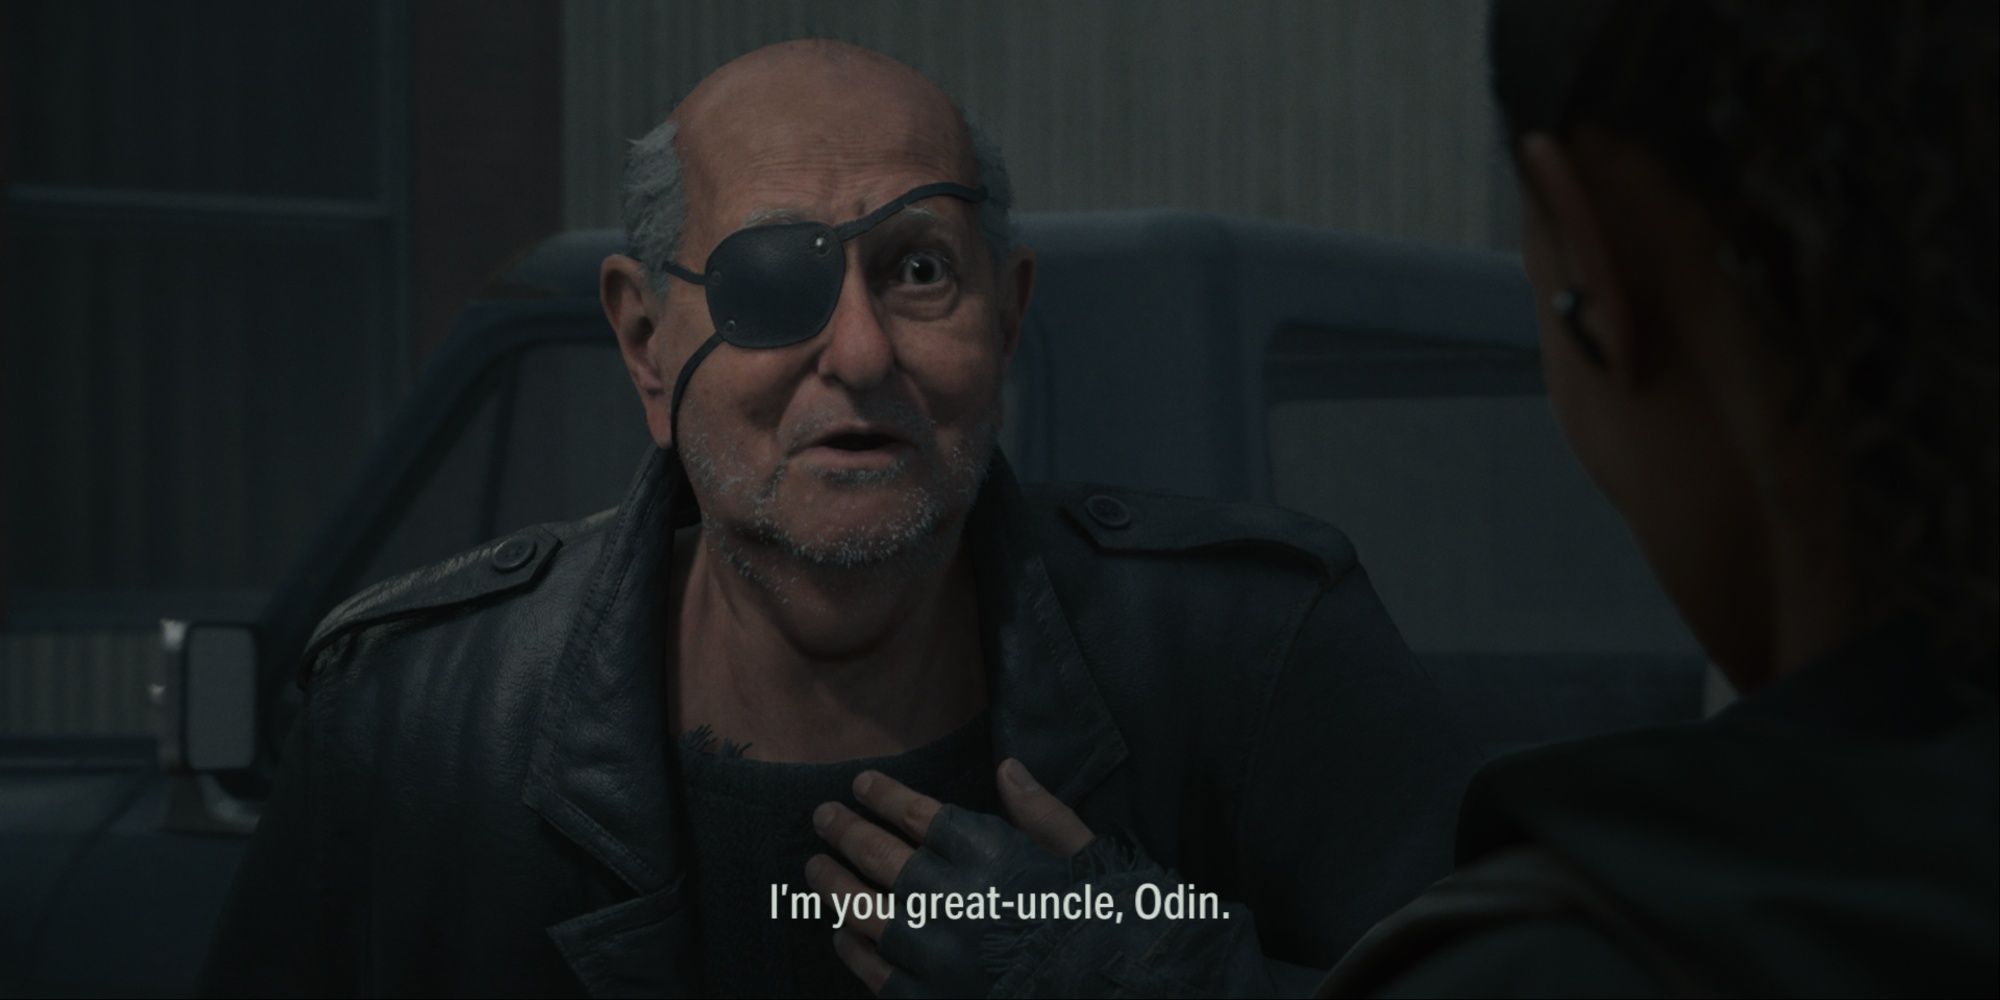 A close-up of Odin's character with the eyepatch introducing himself to Saga as her great-uncle, placing a hand on his chest in greeting.